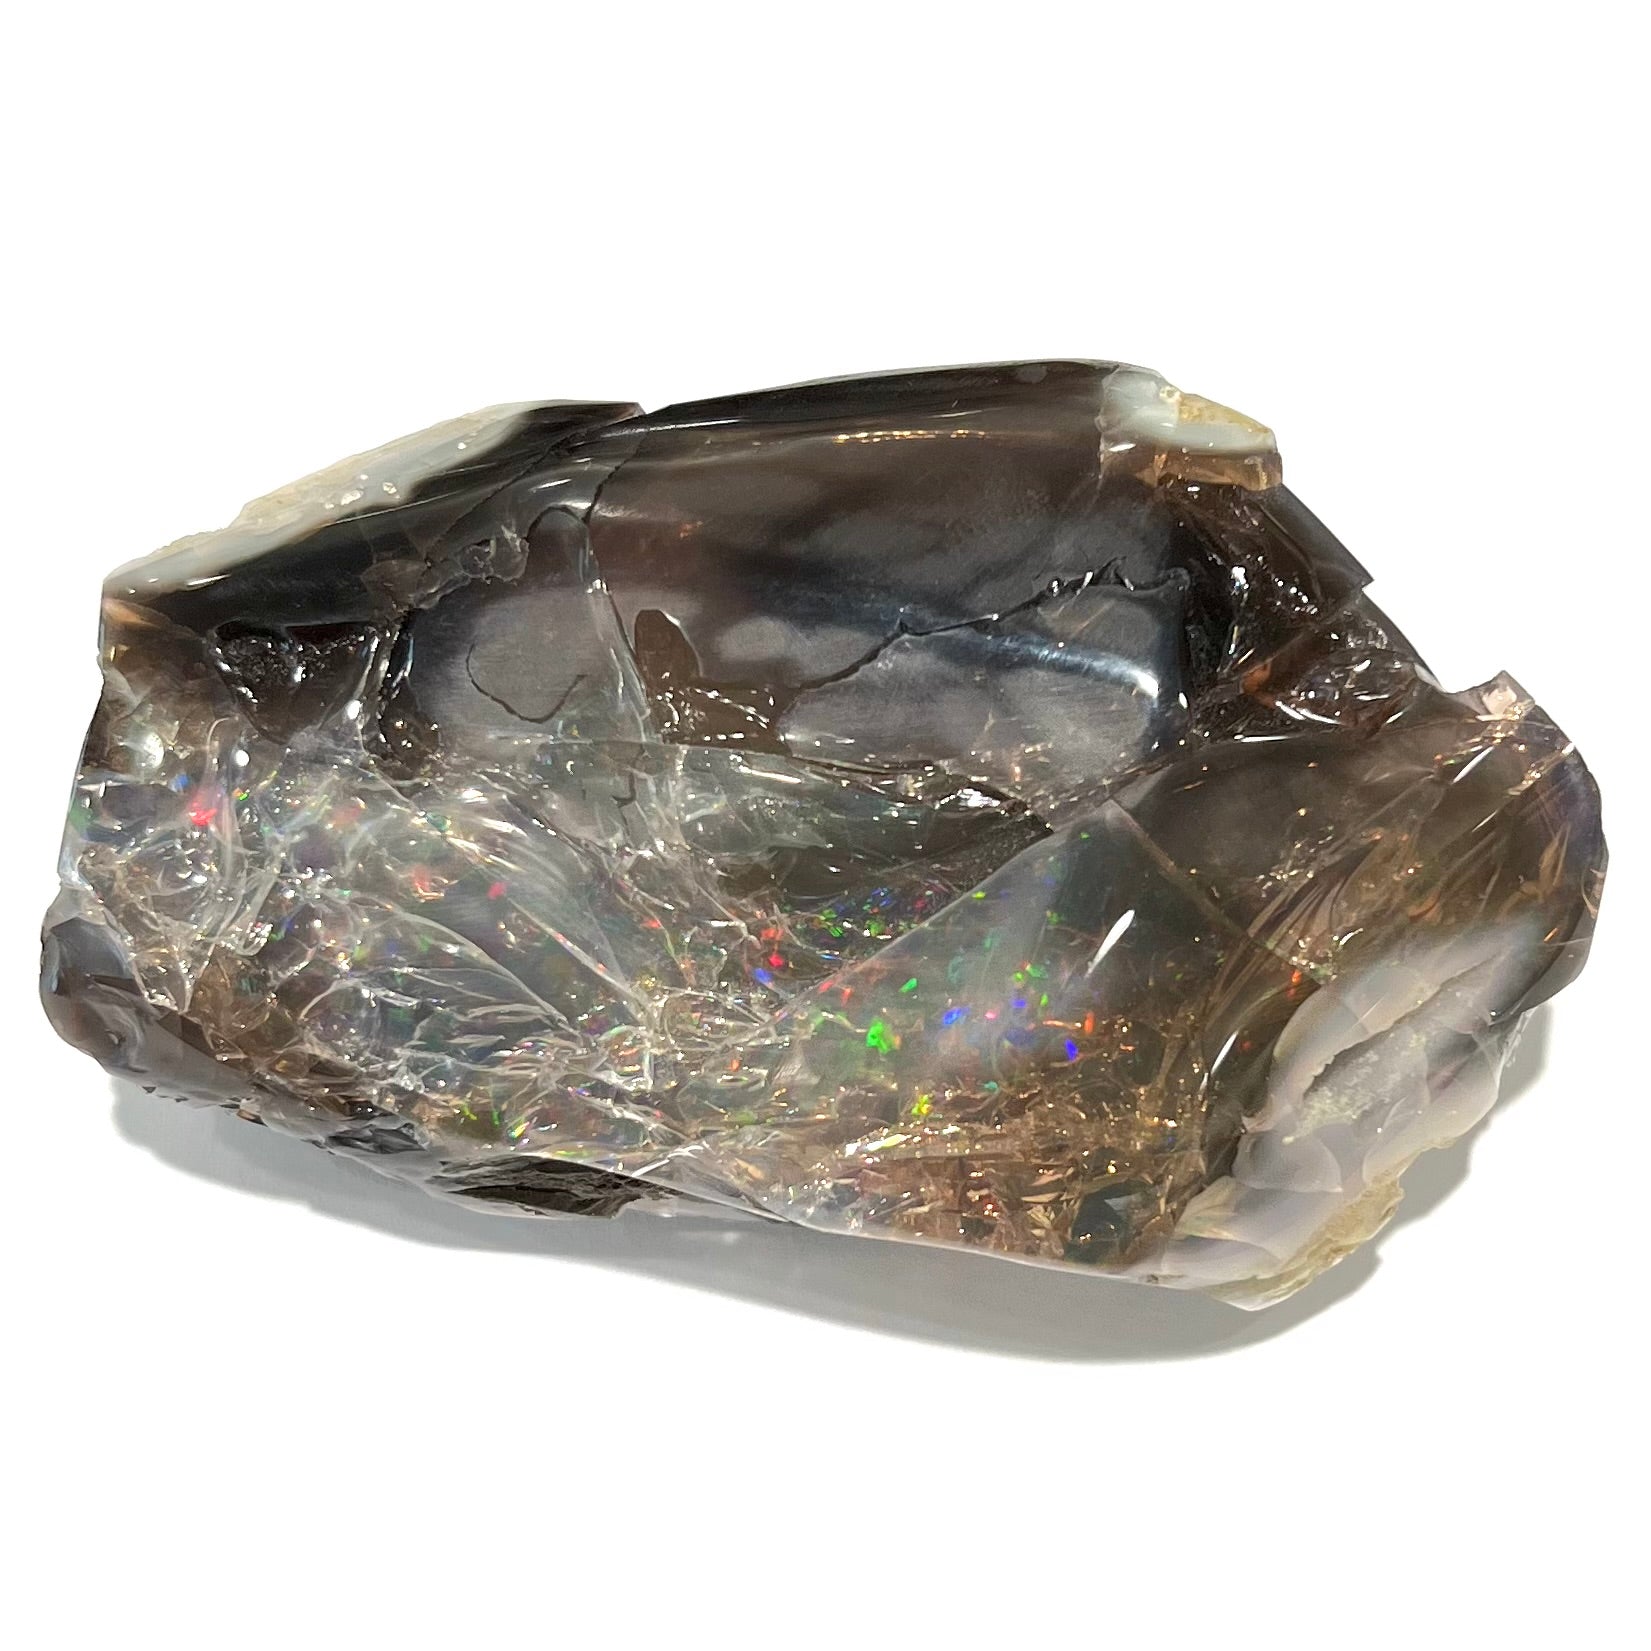 A brown opal crystal specimen from Virgin Valley, Nevada.